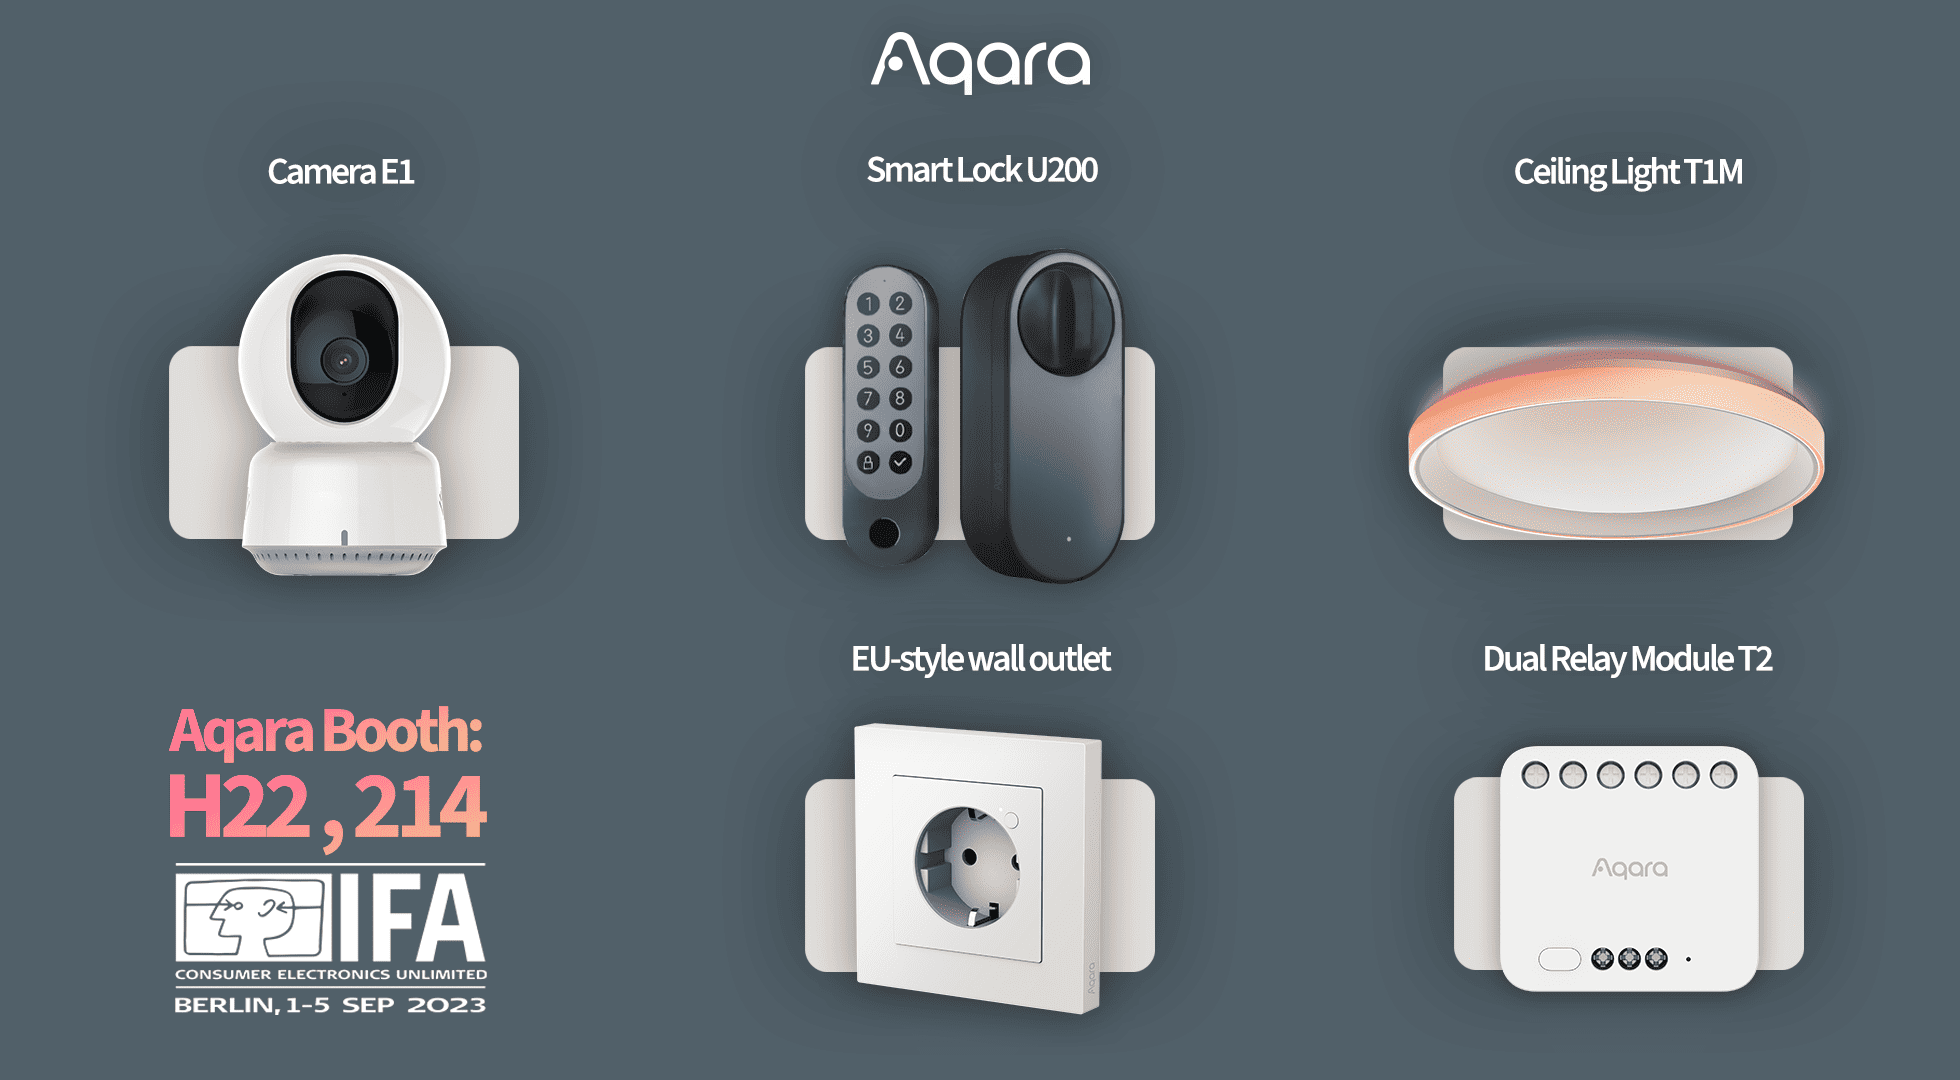 Aqara To Unveil New Smart Home Devices at IFA 2023